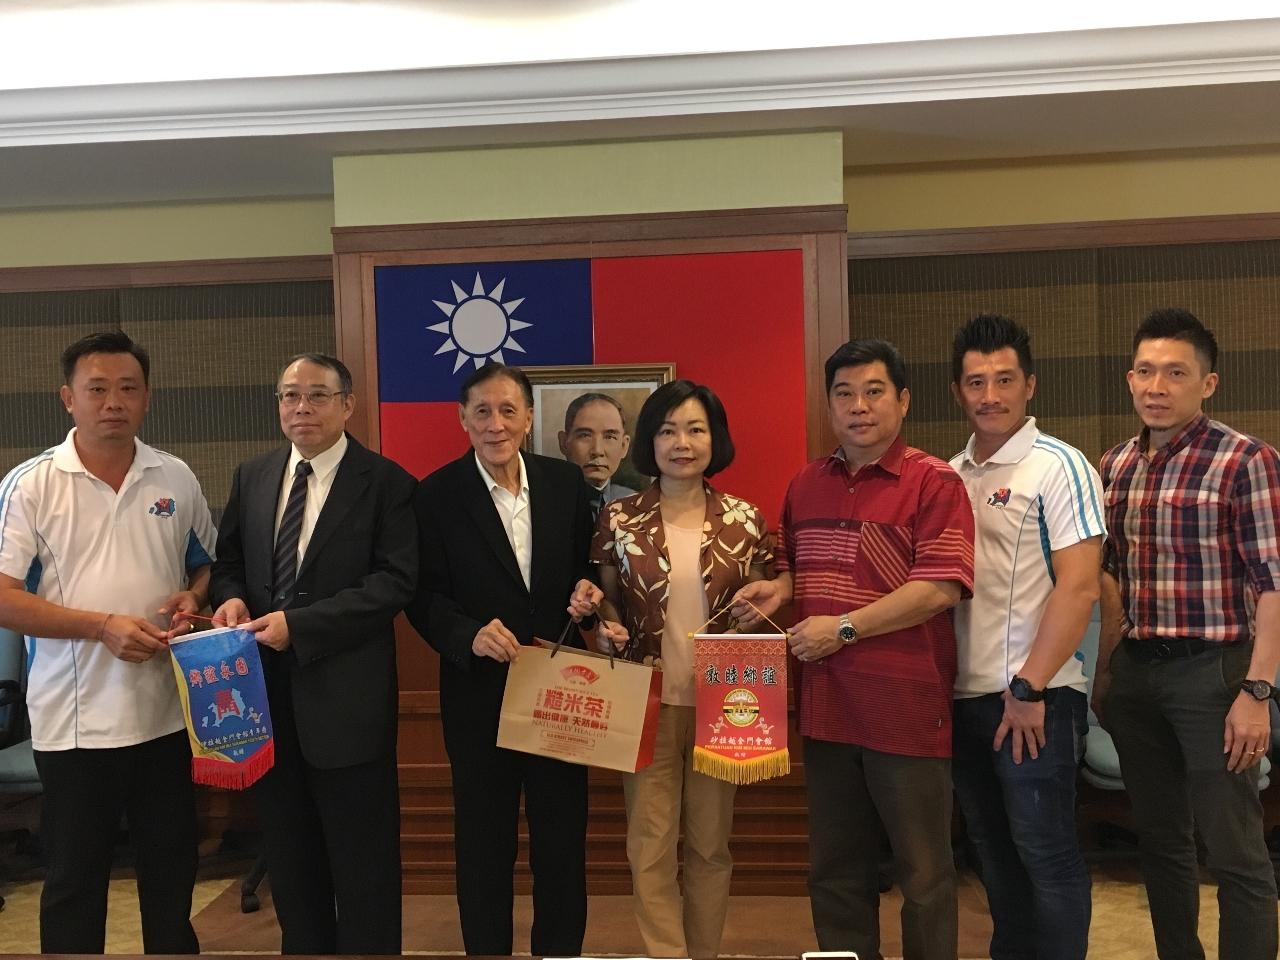 Representative Anne Hung (middle) received the pennant and local specialty souvenir from Kim Mui Association Sarawak Chairman Chua Seng Chai (third left),  Vice chairman Chua Chui Peng (third right) and Youth league cadre handsel.
